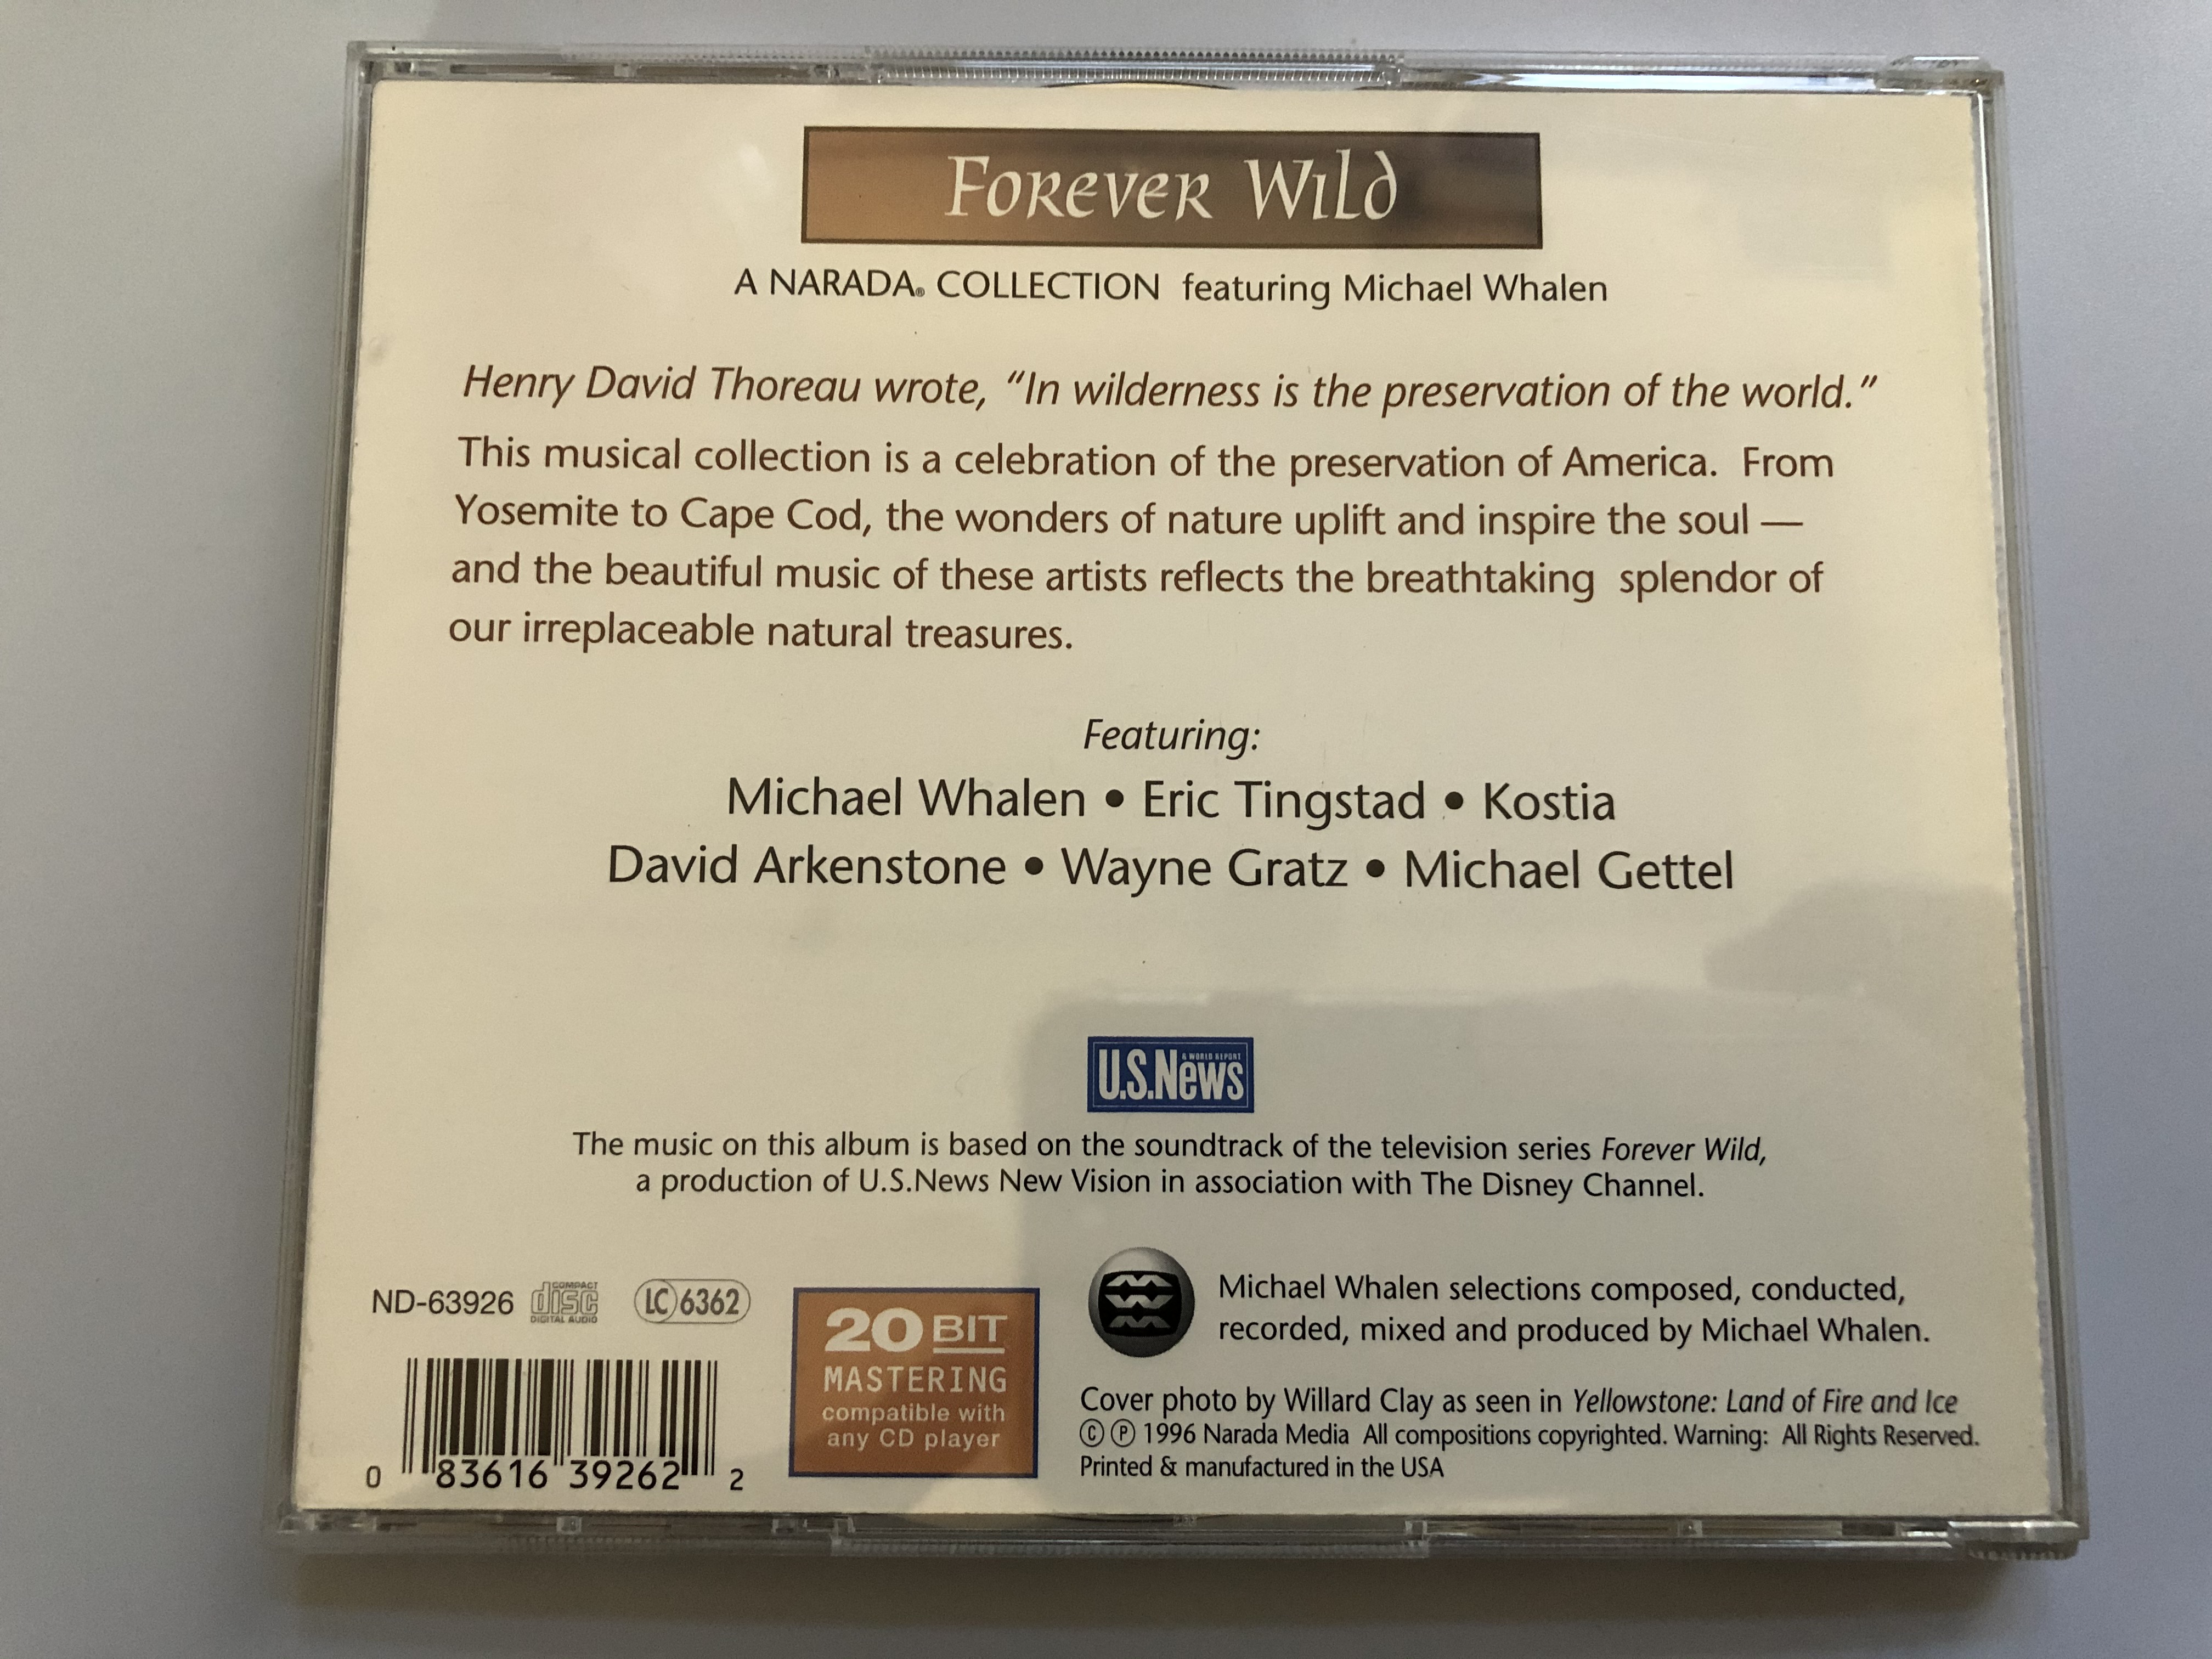 forever-wild-celebrating-the-american-wilderness-a-narada-collection-featuring-michael-whalen-narada-2x-audio-cd-1996-nd-63926-9-.jpg